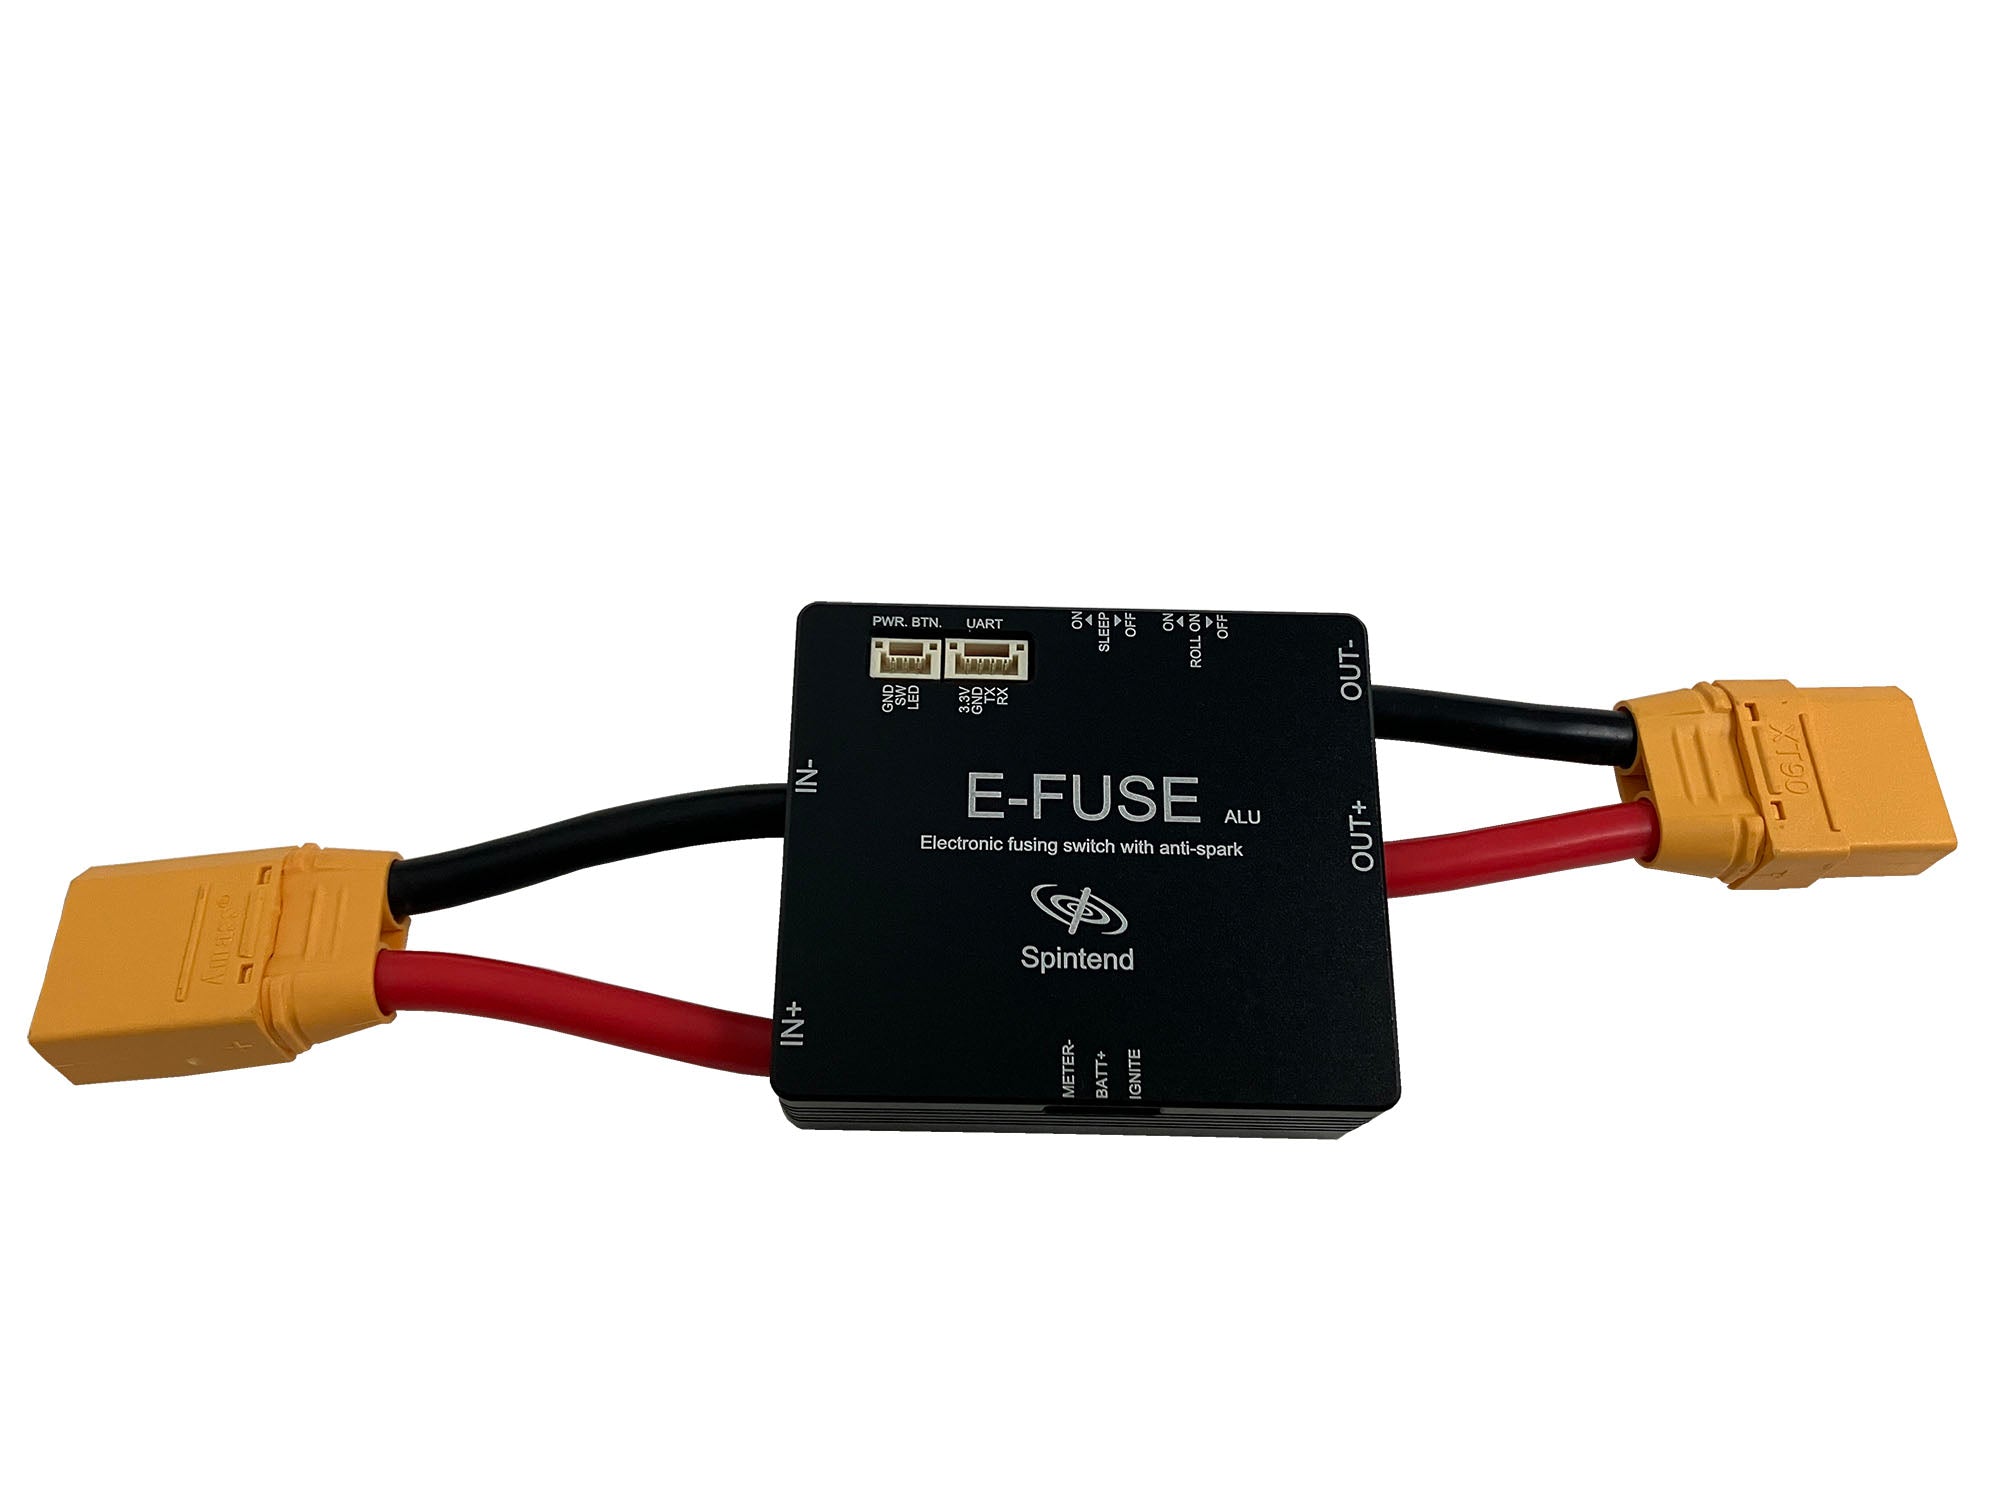 Multifunctional 80V 30A-180A Congigurable Efuse with Antispark Switch